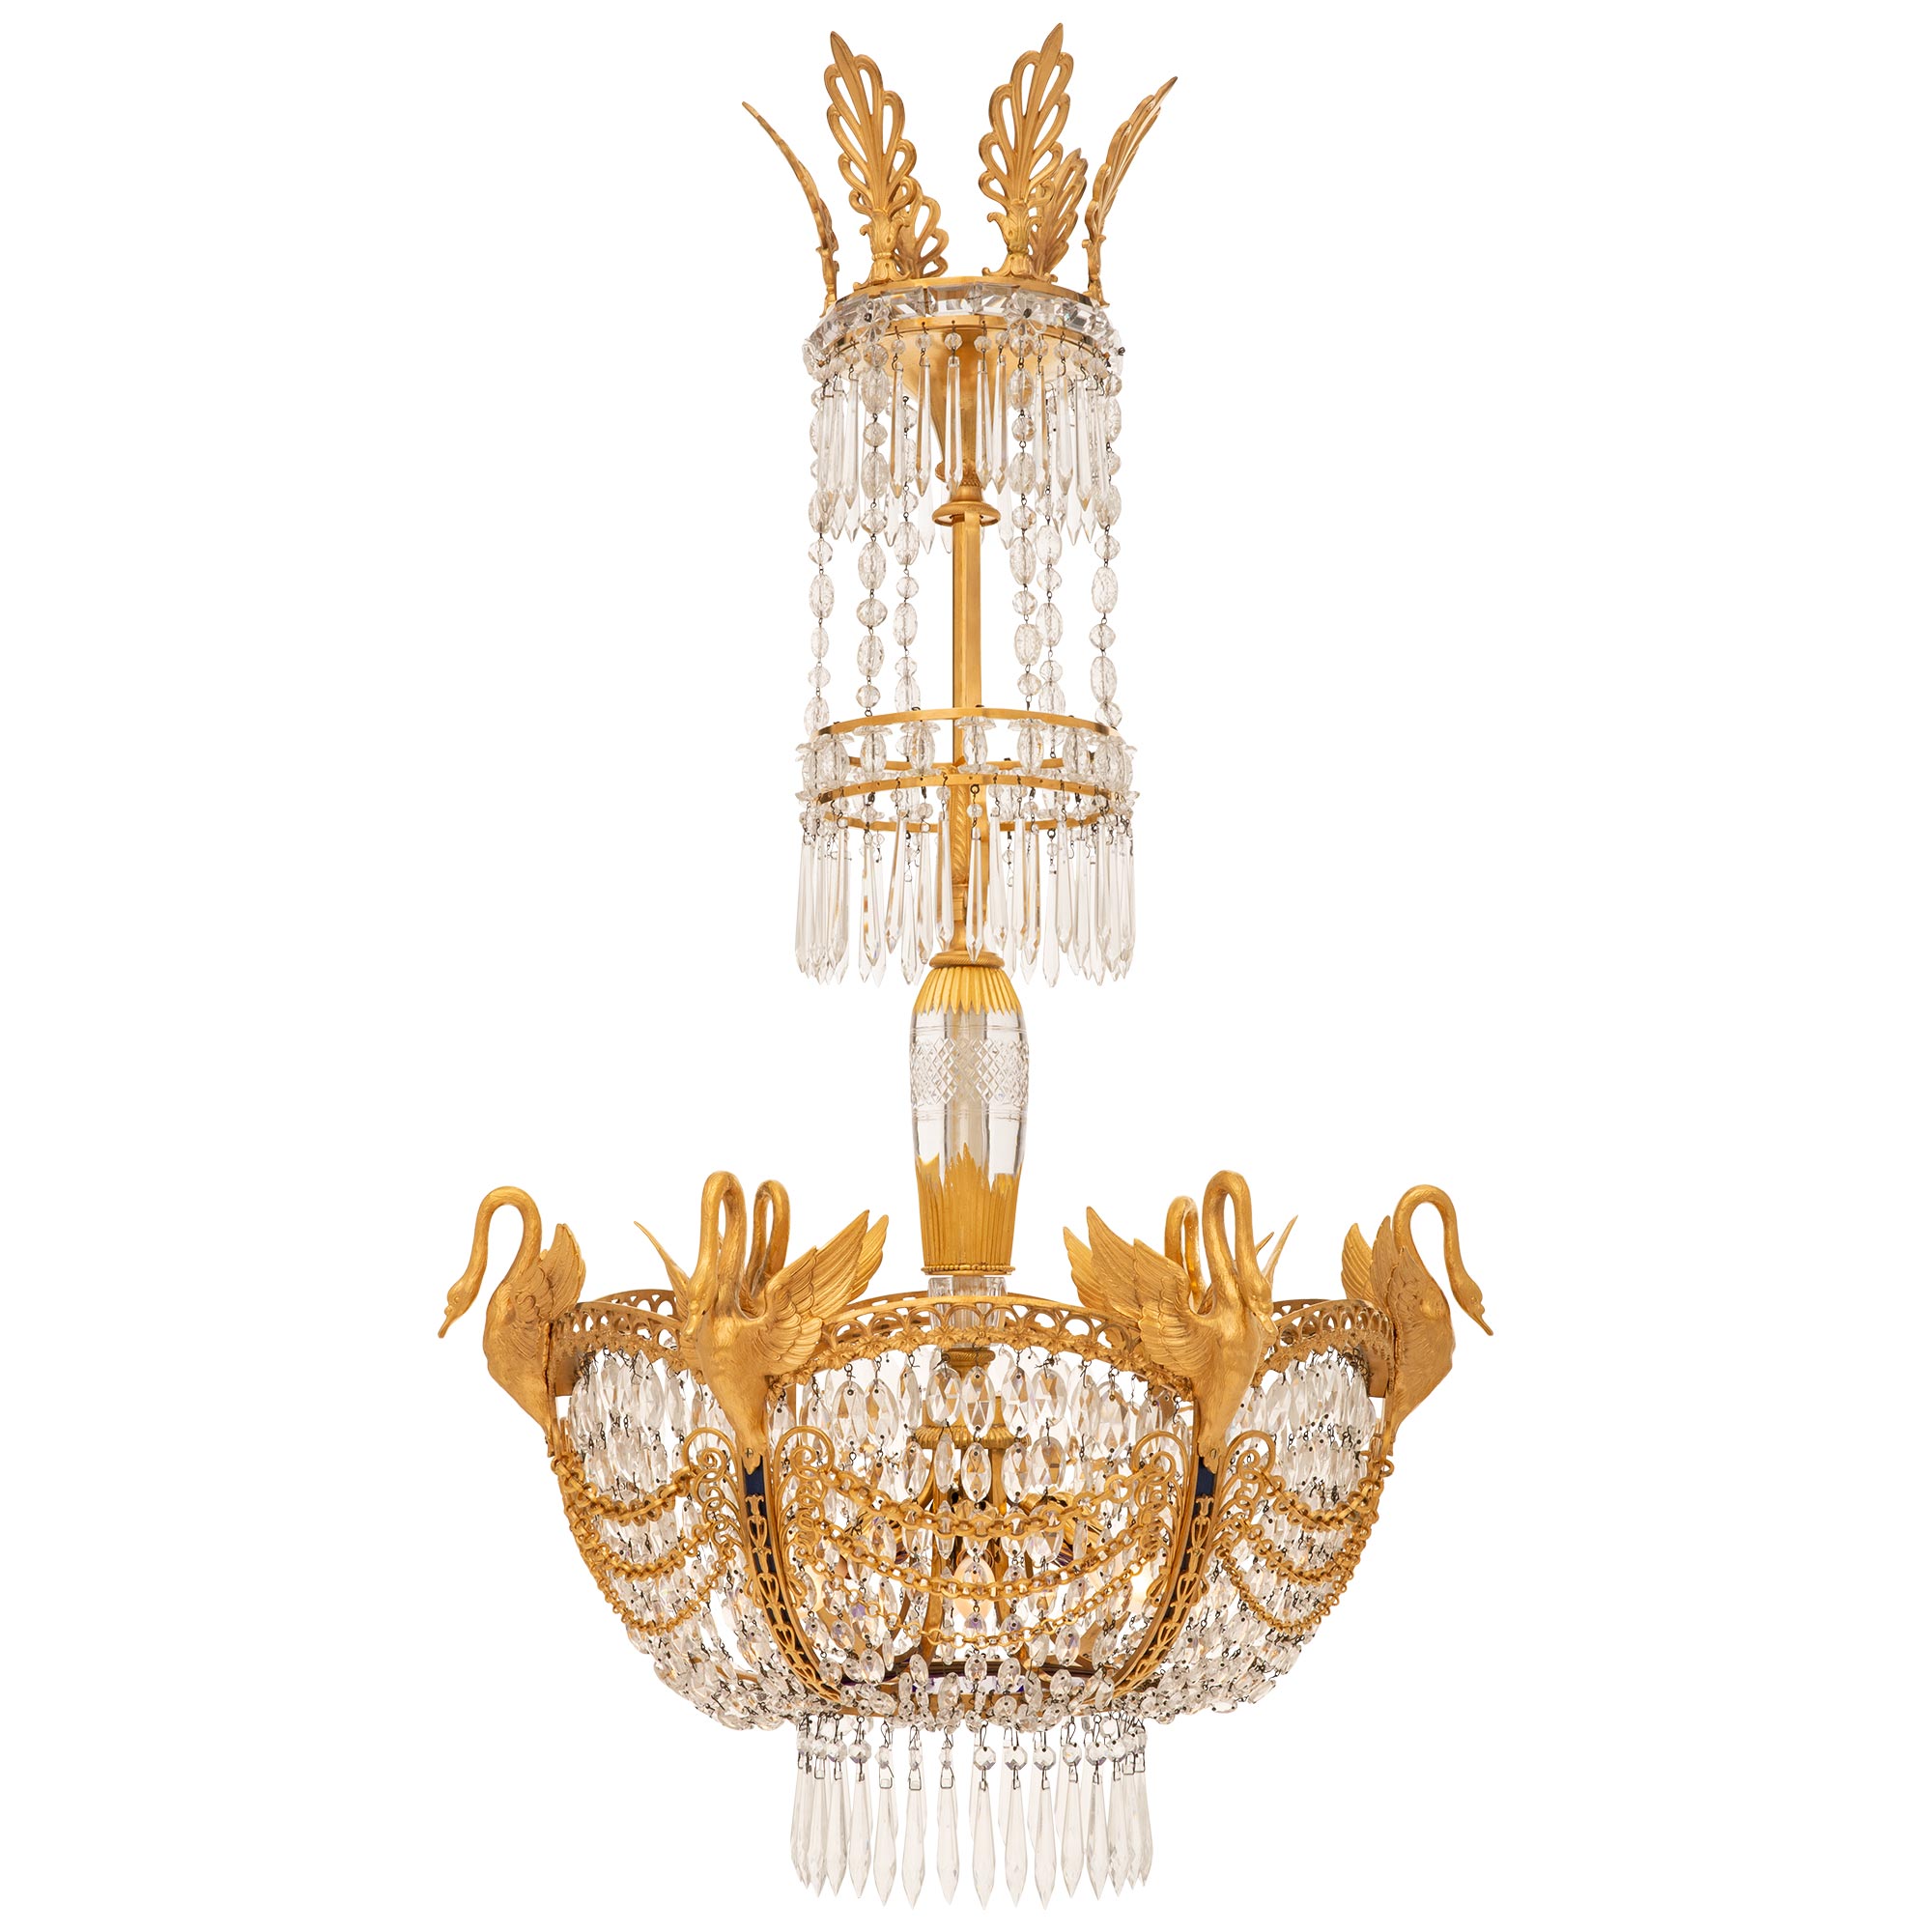 Russian 19th c. Neo-Classical St. Crystal, Ormolu, Bronze & Glass Chandelier